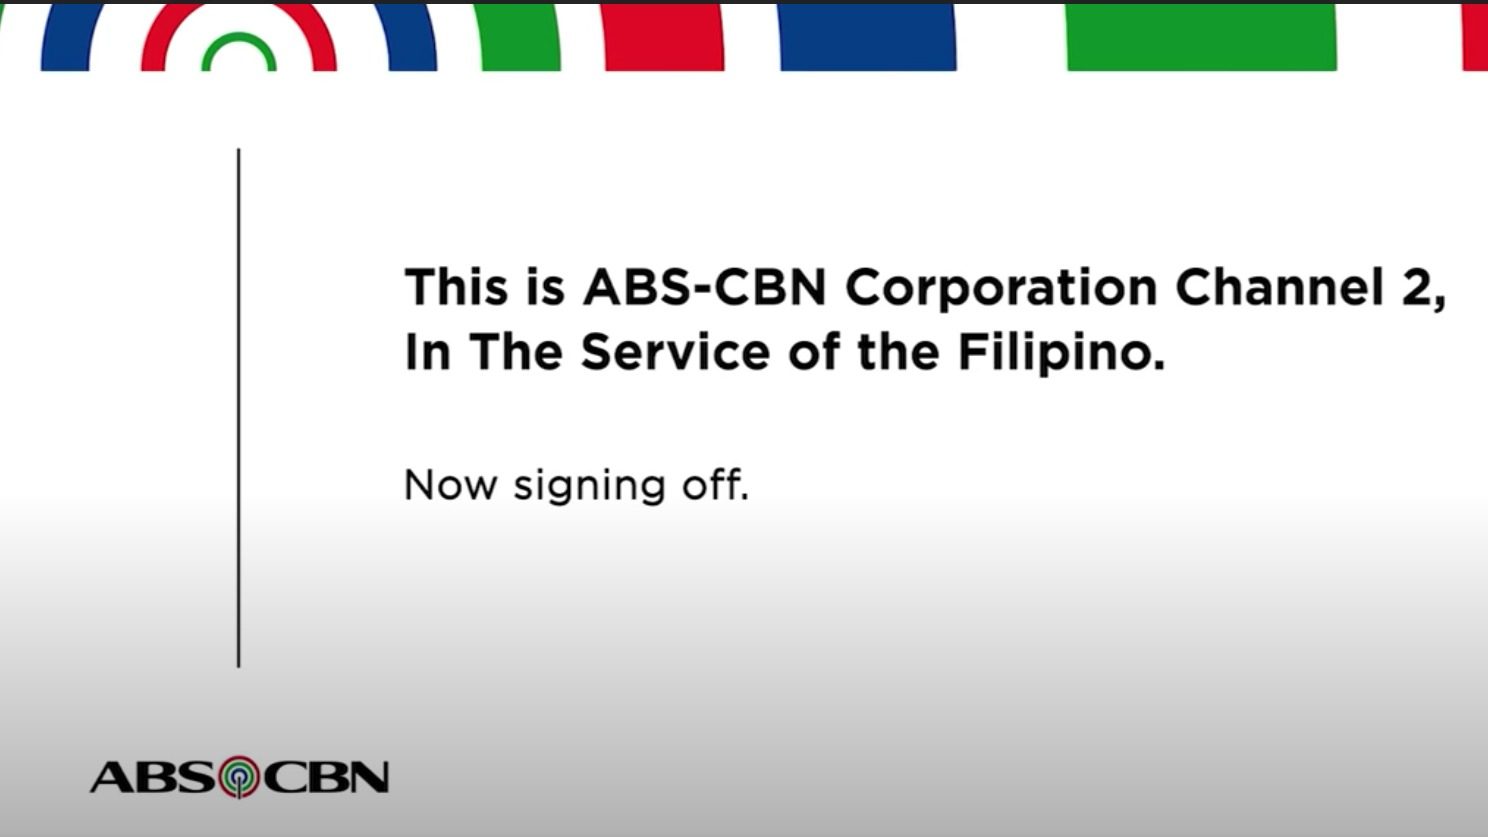 ABS-CBN’s last sign-off (for a while), and the voice behind it